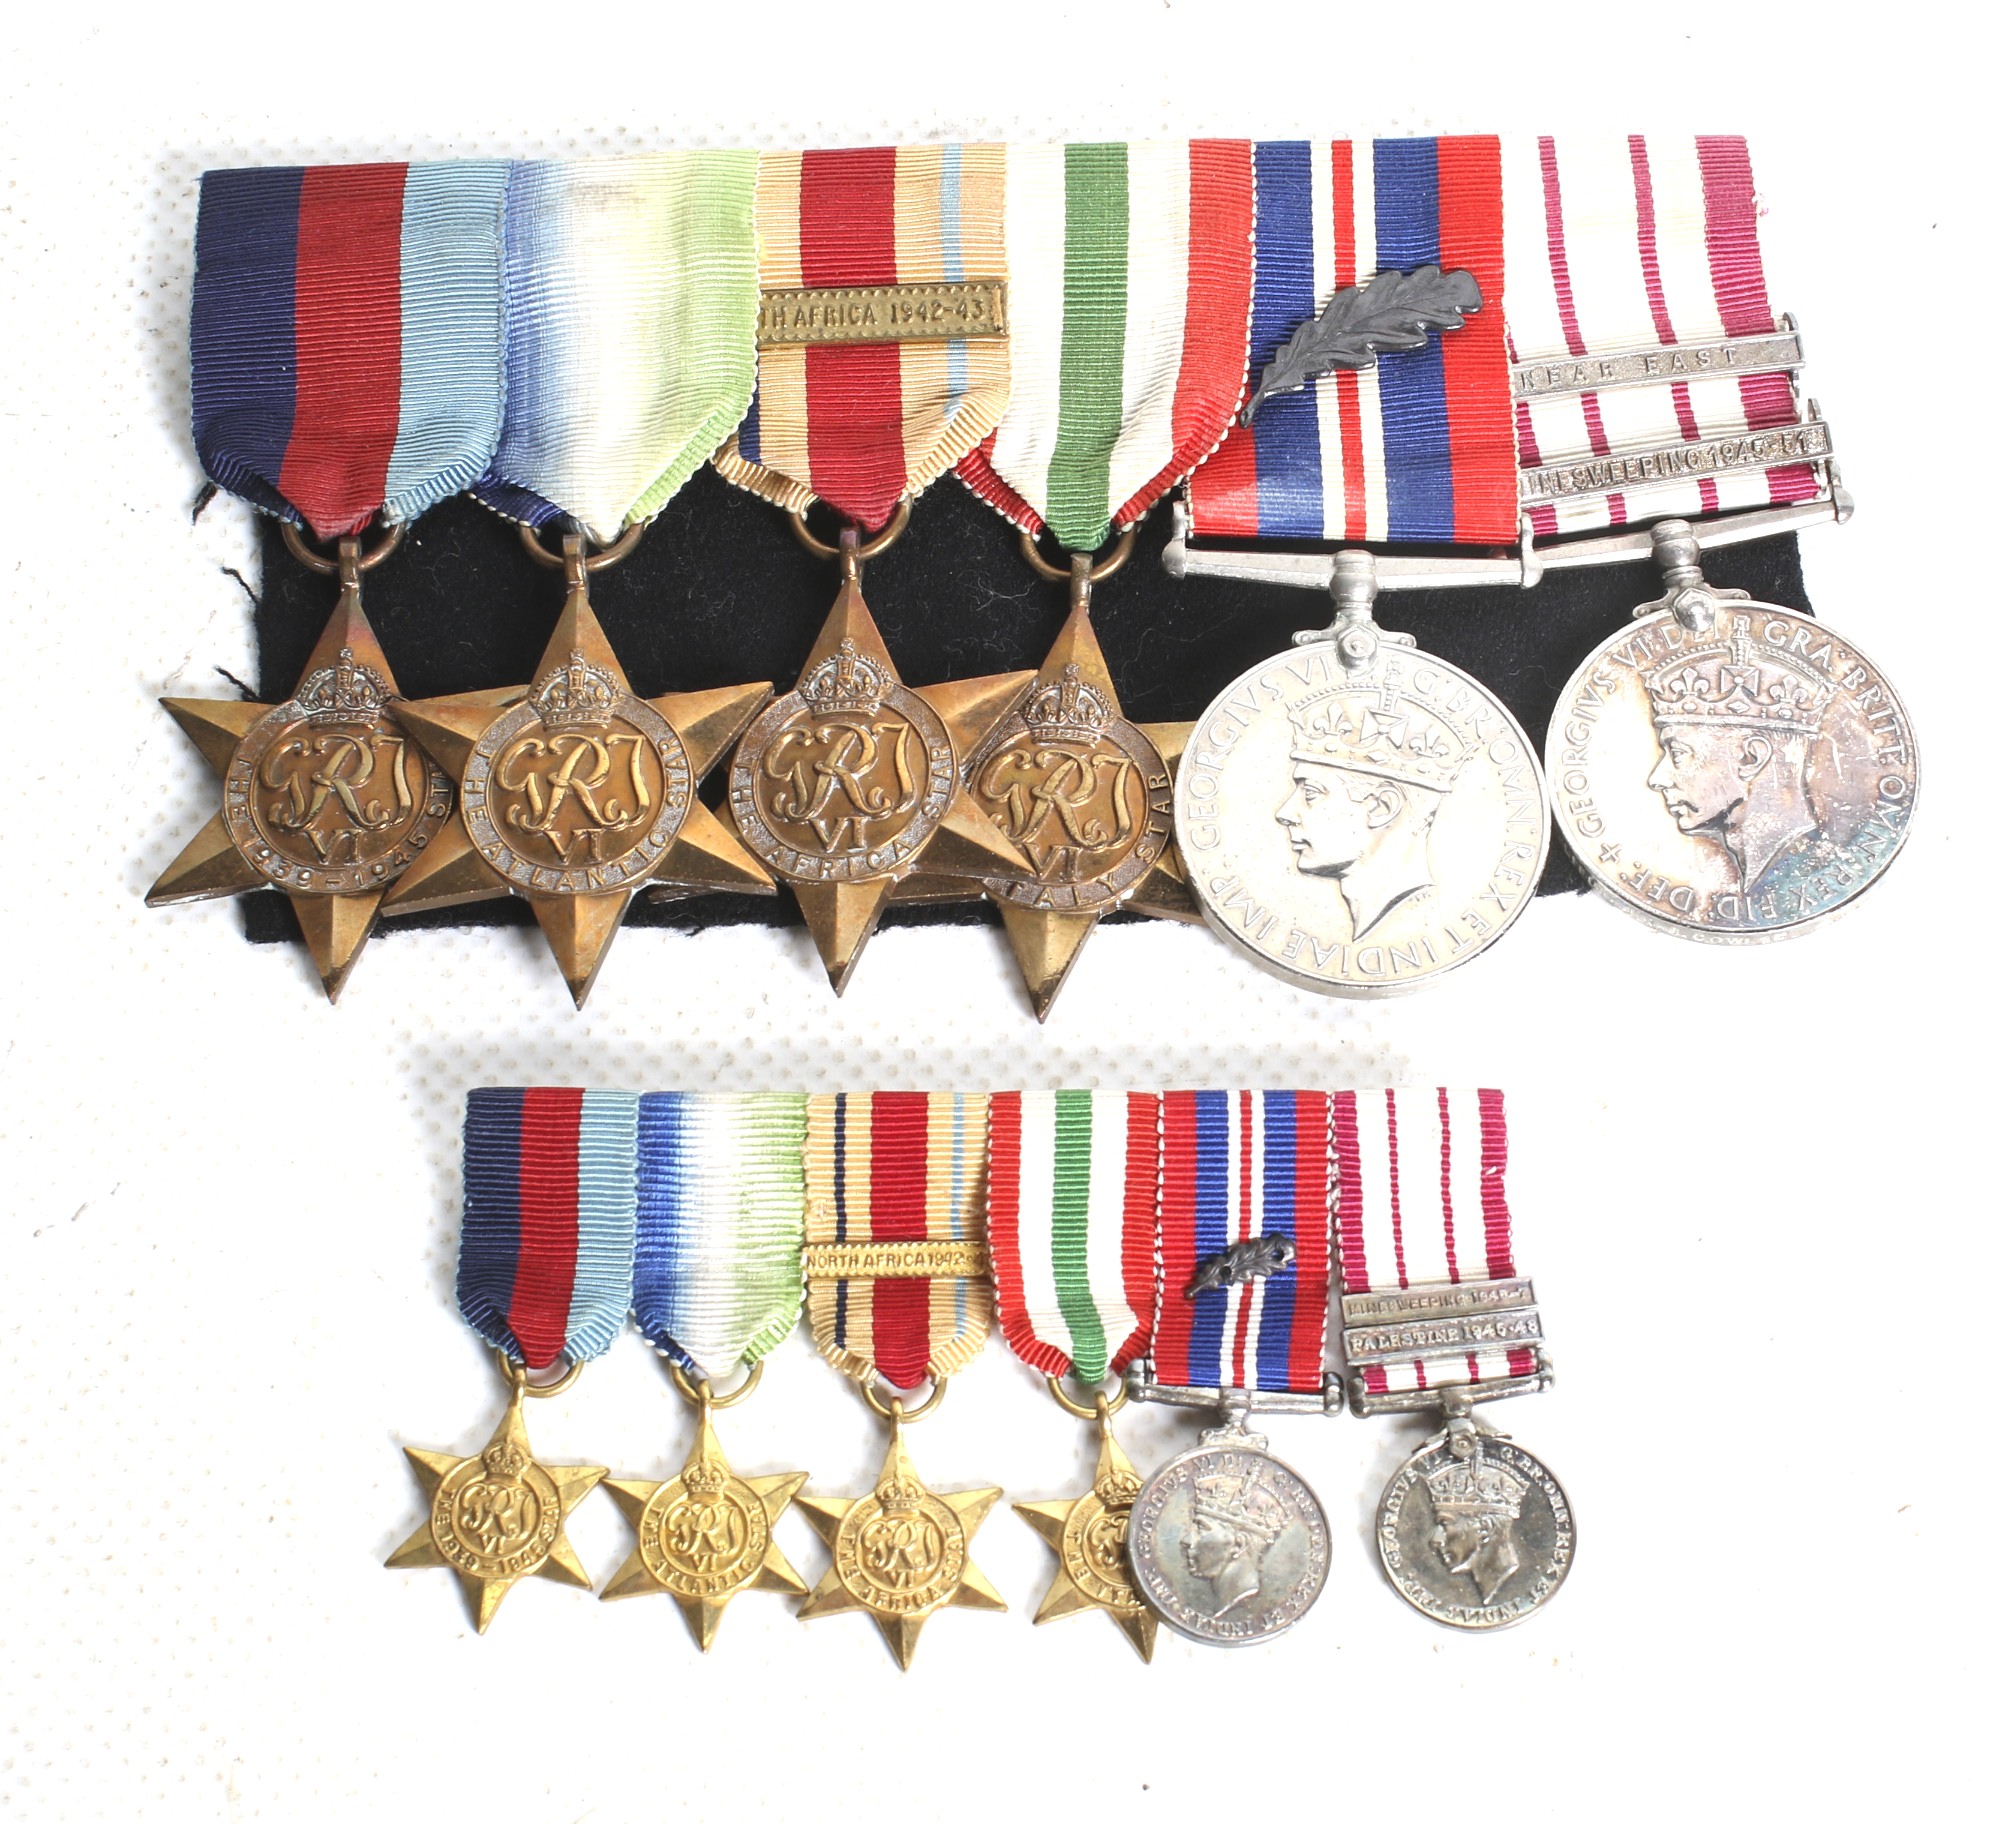 A WWII Royal Navy Officers Medal Group awarded to Lt. JRJ Cowlin, Royal Navy.